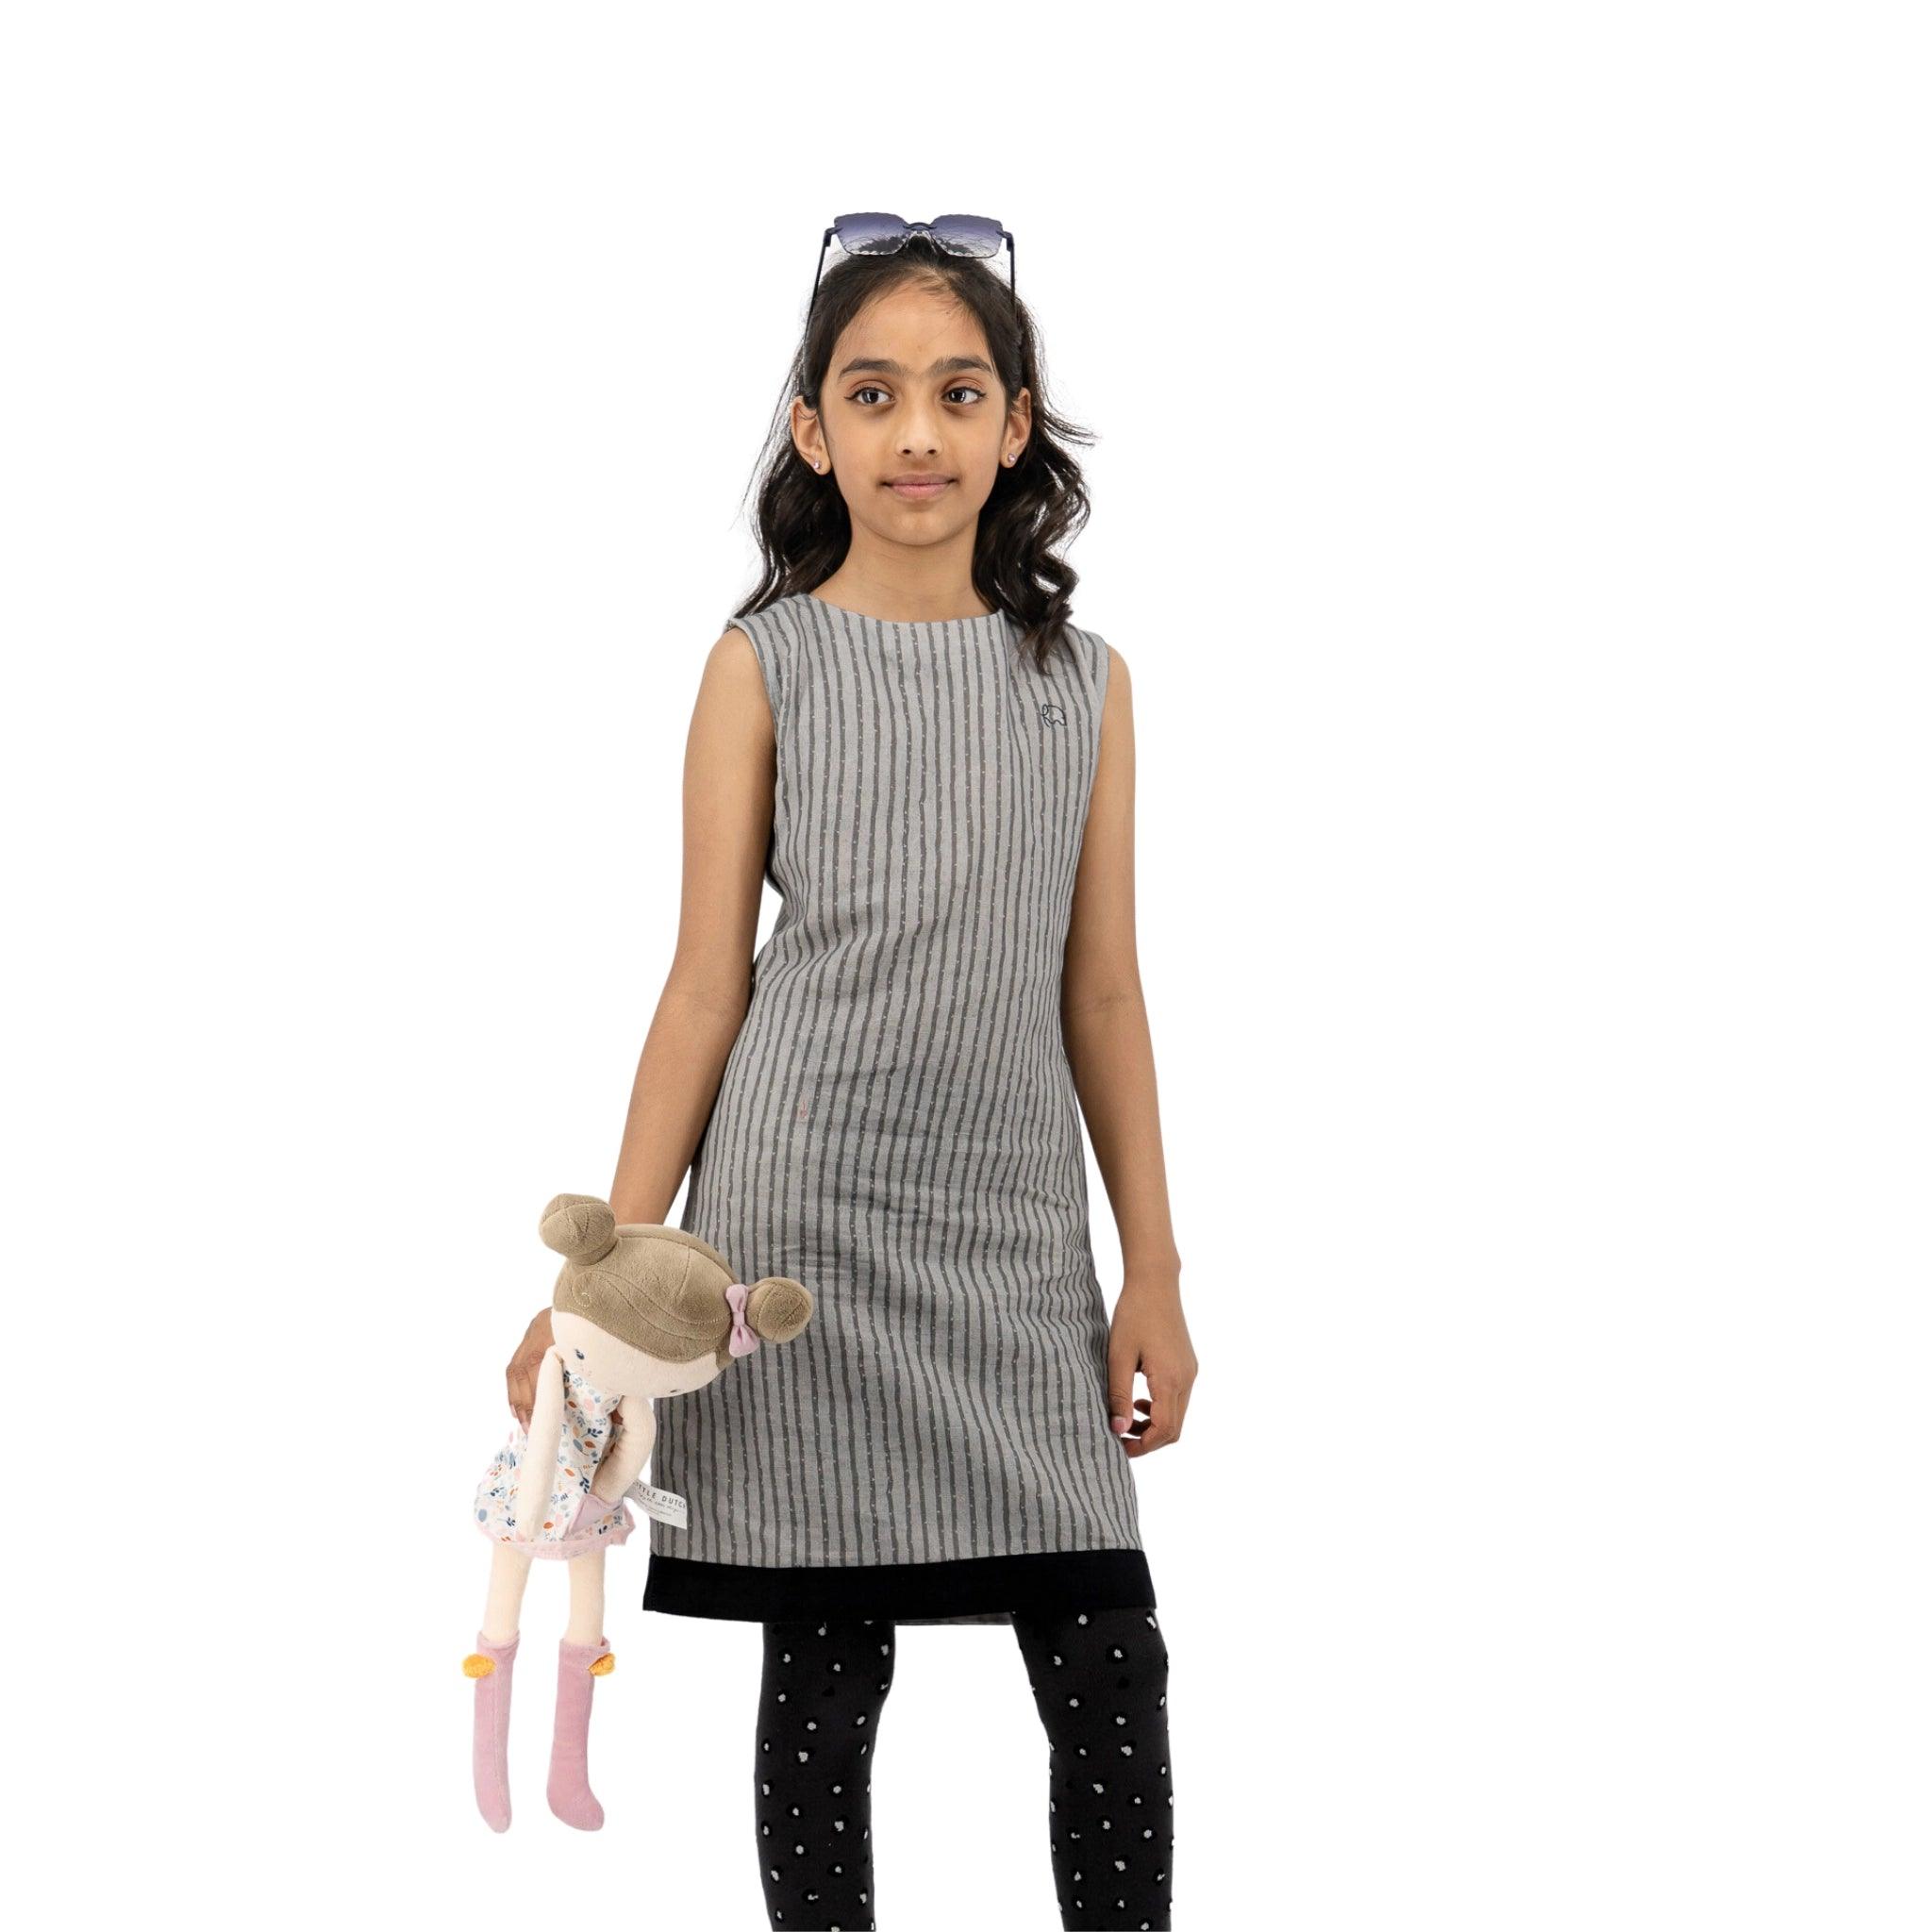 Young girl in a Karee Linen Cotton Round Neck Frock for Kids in Steel Grey holding a doll, standing against a white background.